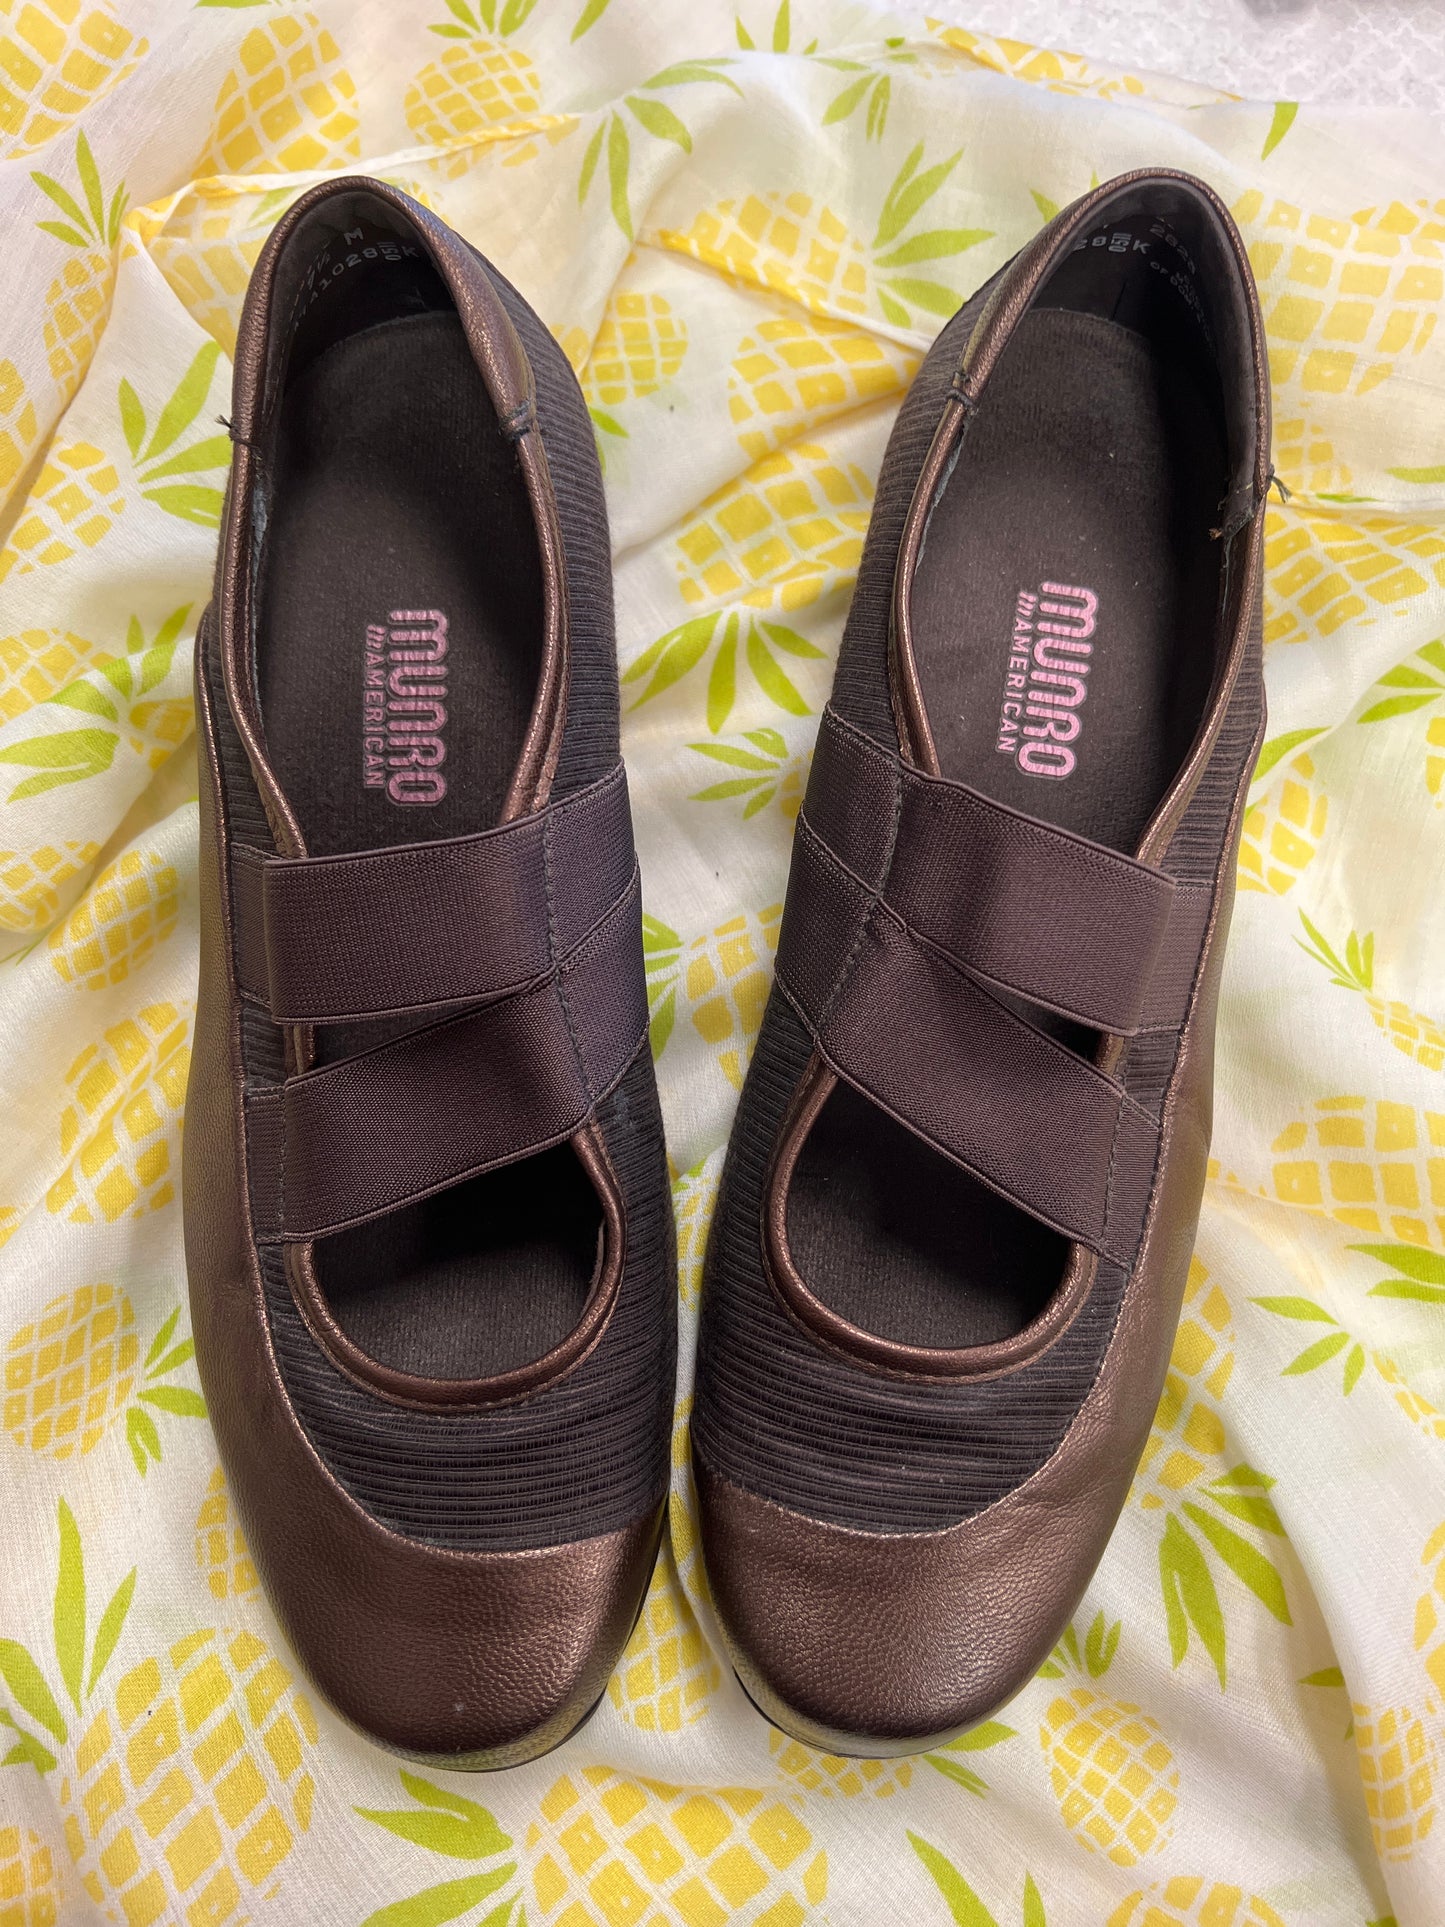 Shoes Flats Other By Munro  Size: 7.5